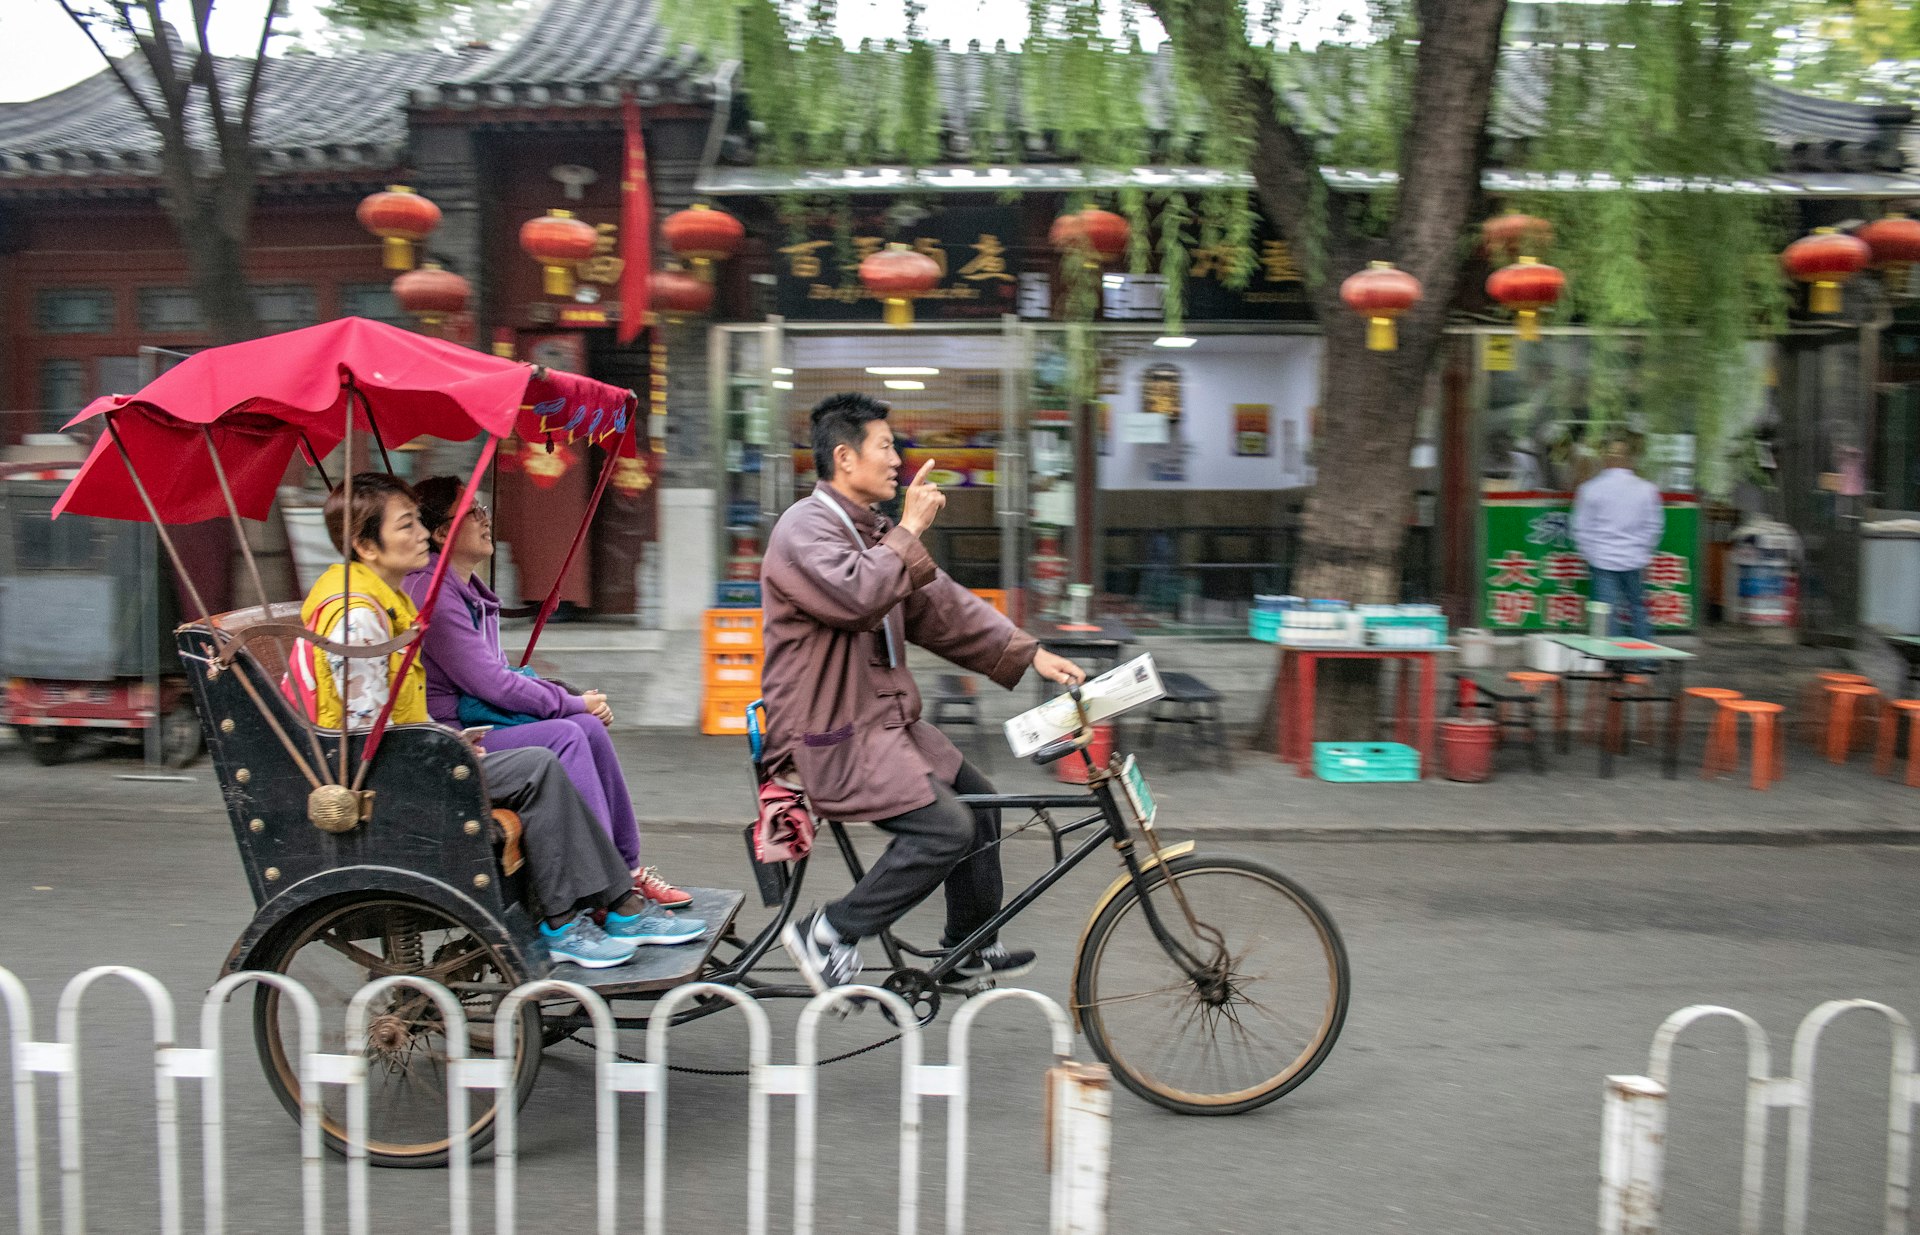 A rickshaw drives tourists around a Beijing hutong district during the Chinese Golden Week